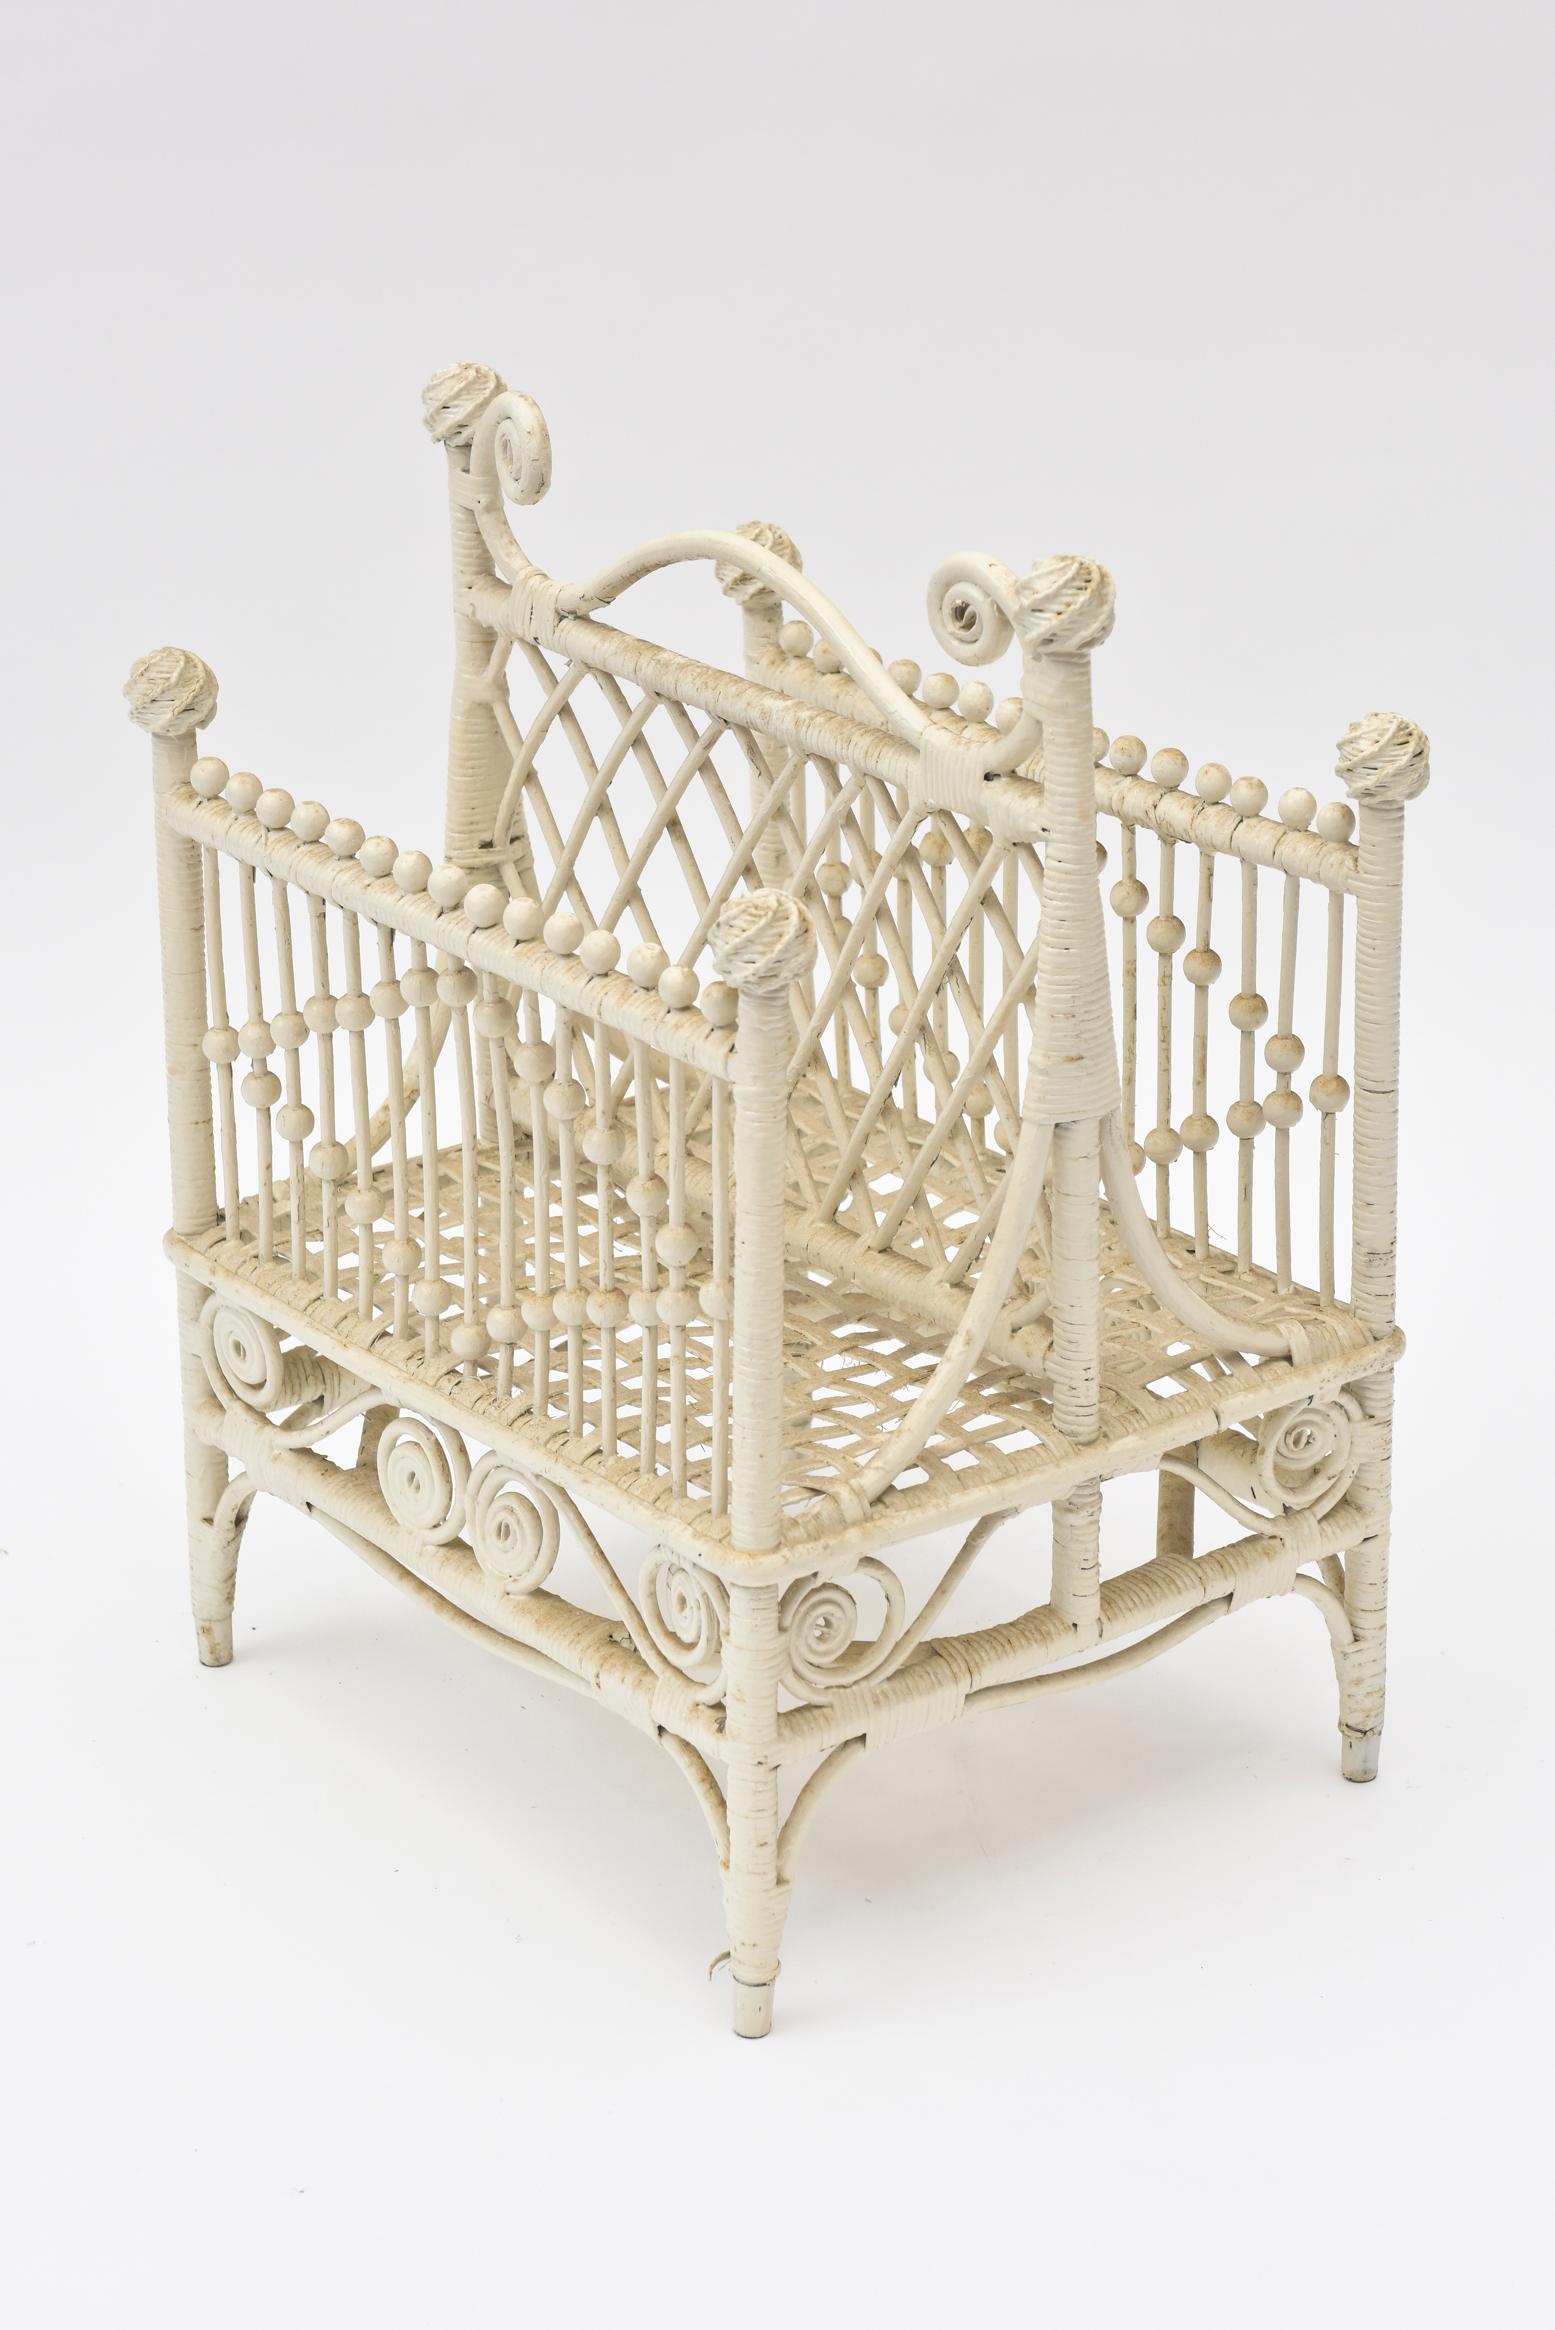 American Wicker Ornate Music or Magazine Rack with Beads Curlicues and Woven Ball Finial For Sale